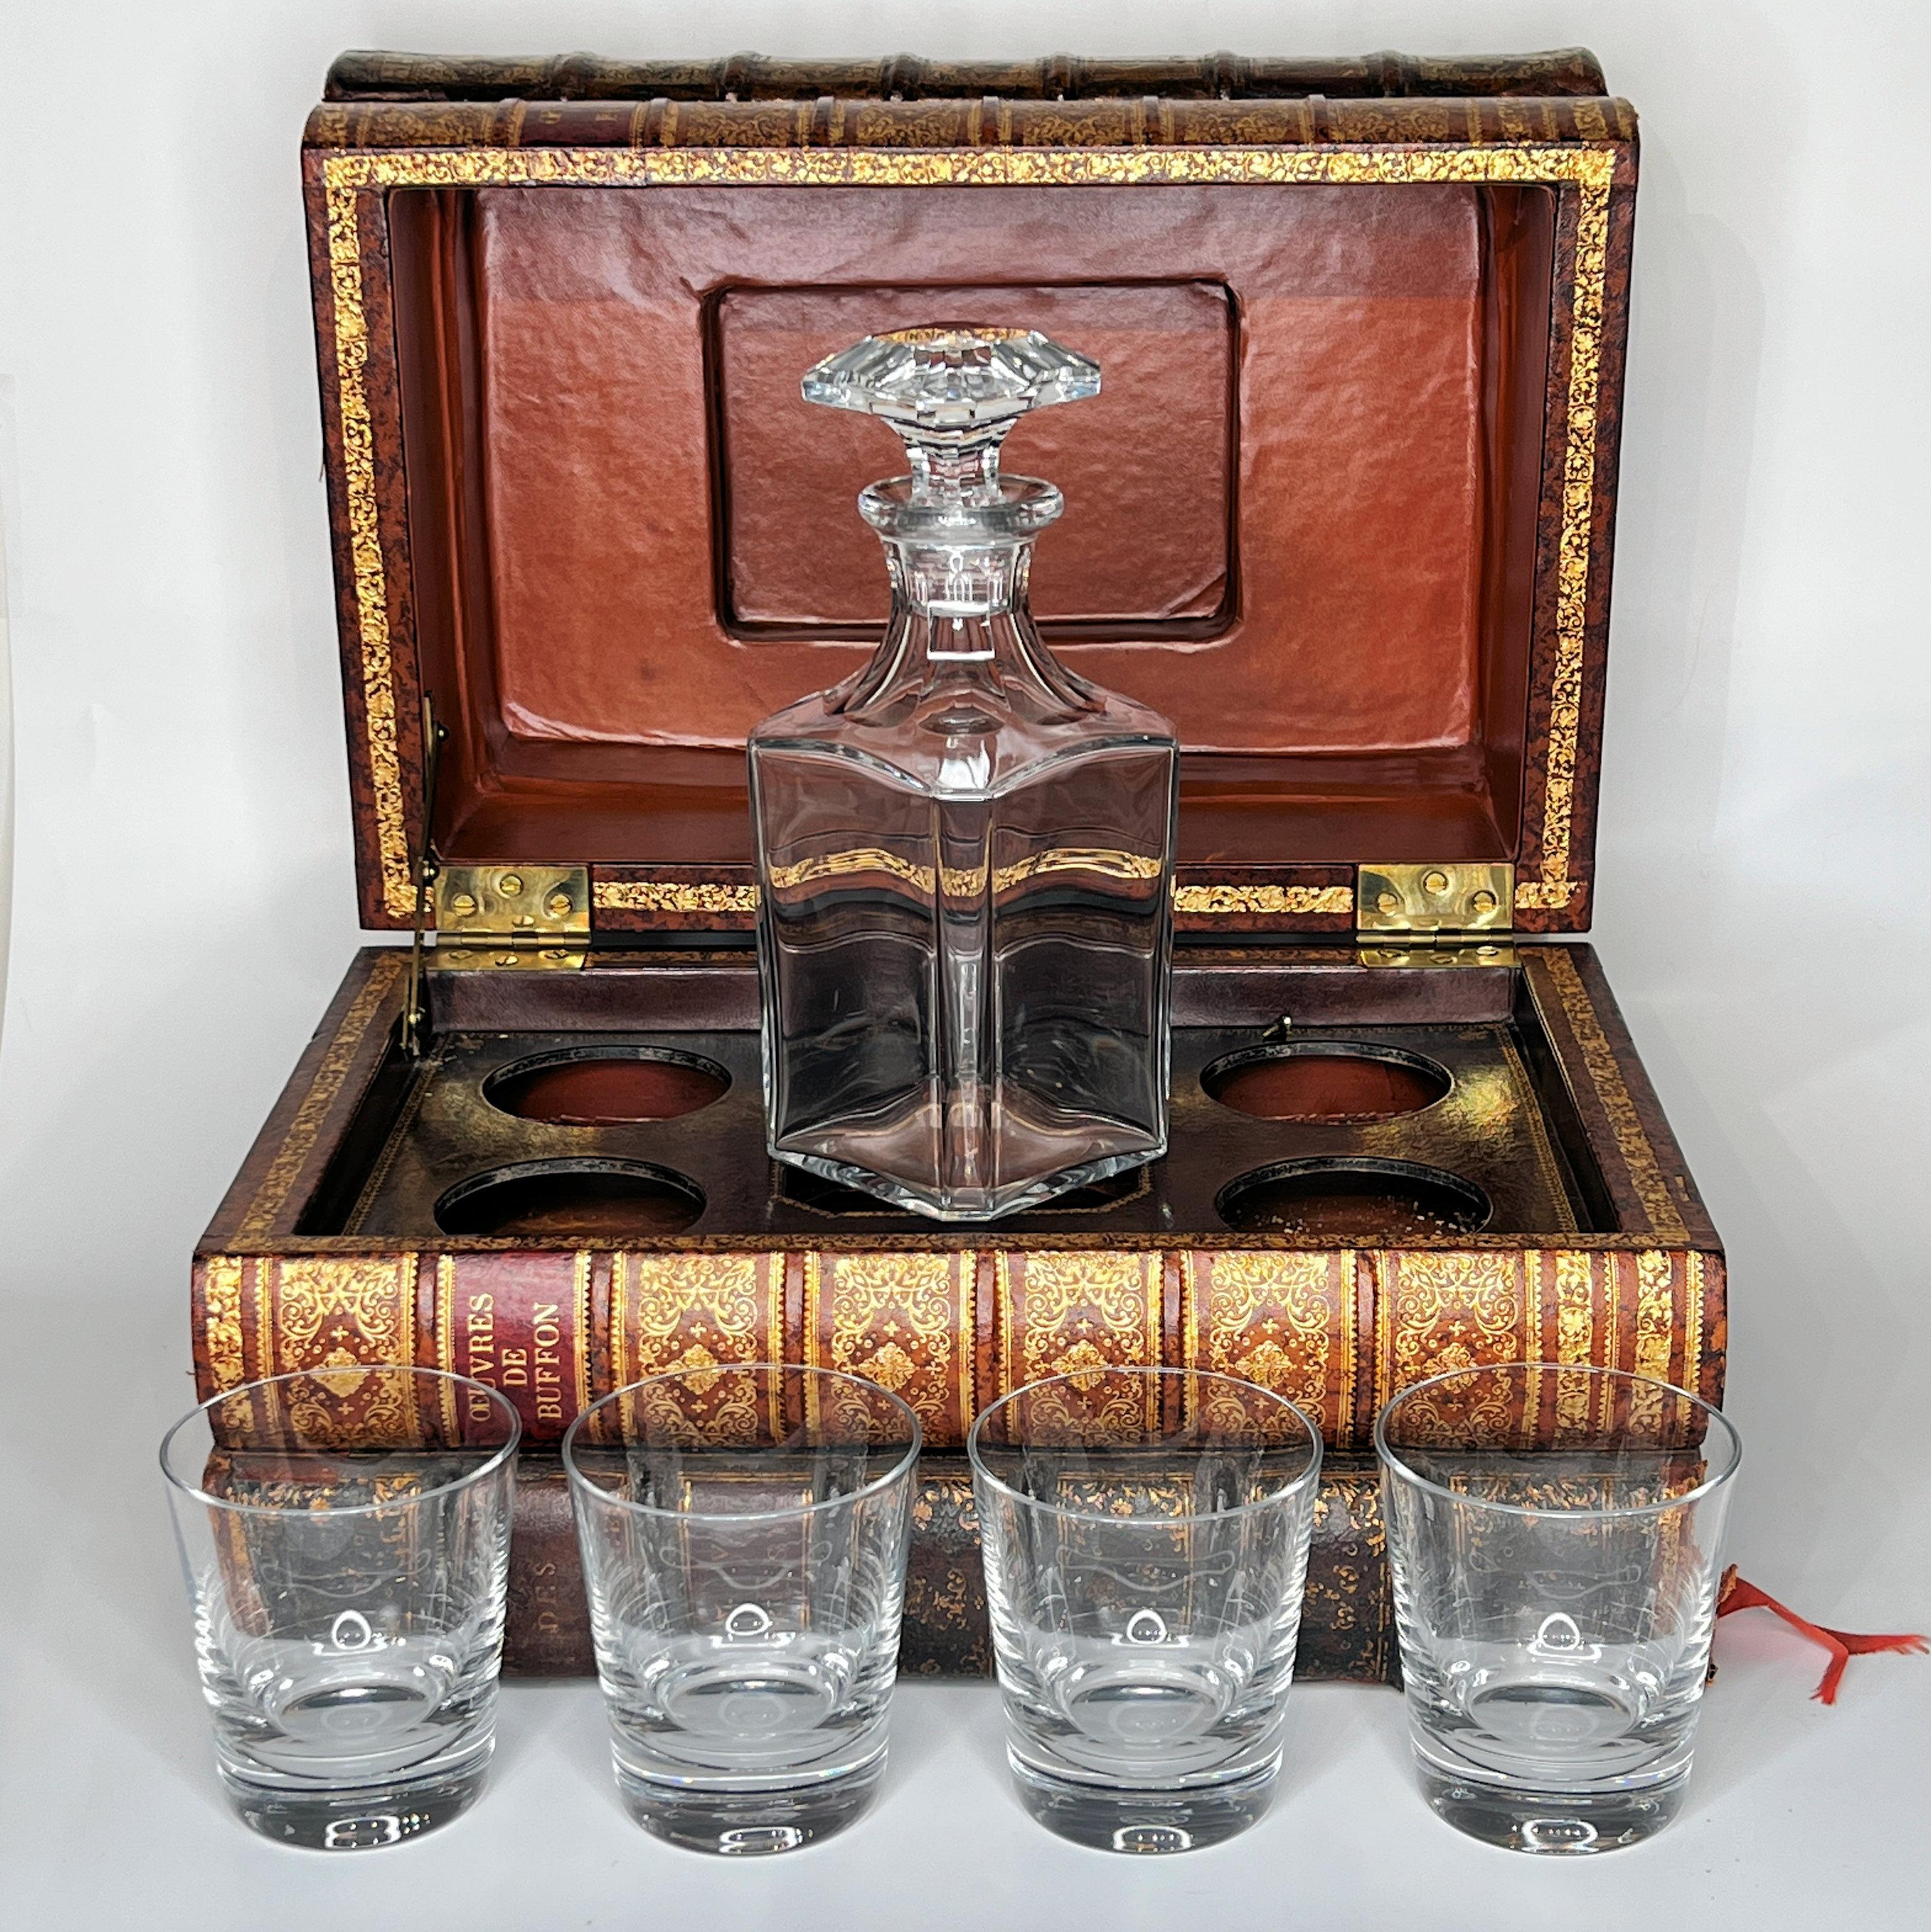 Very fine quality Baccarat decanter and highball glass set in antique style book form box.